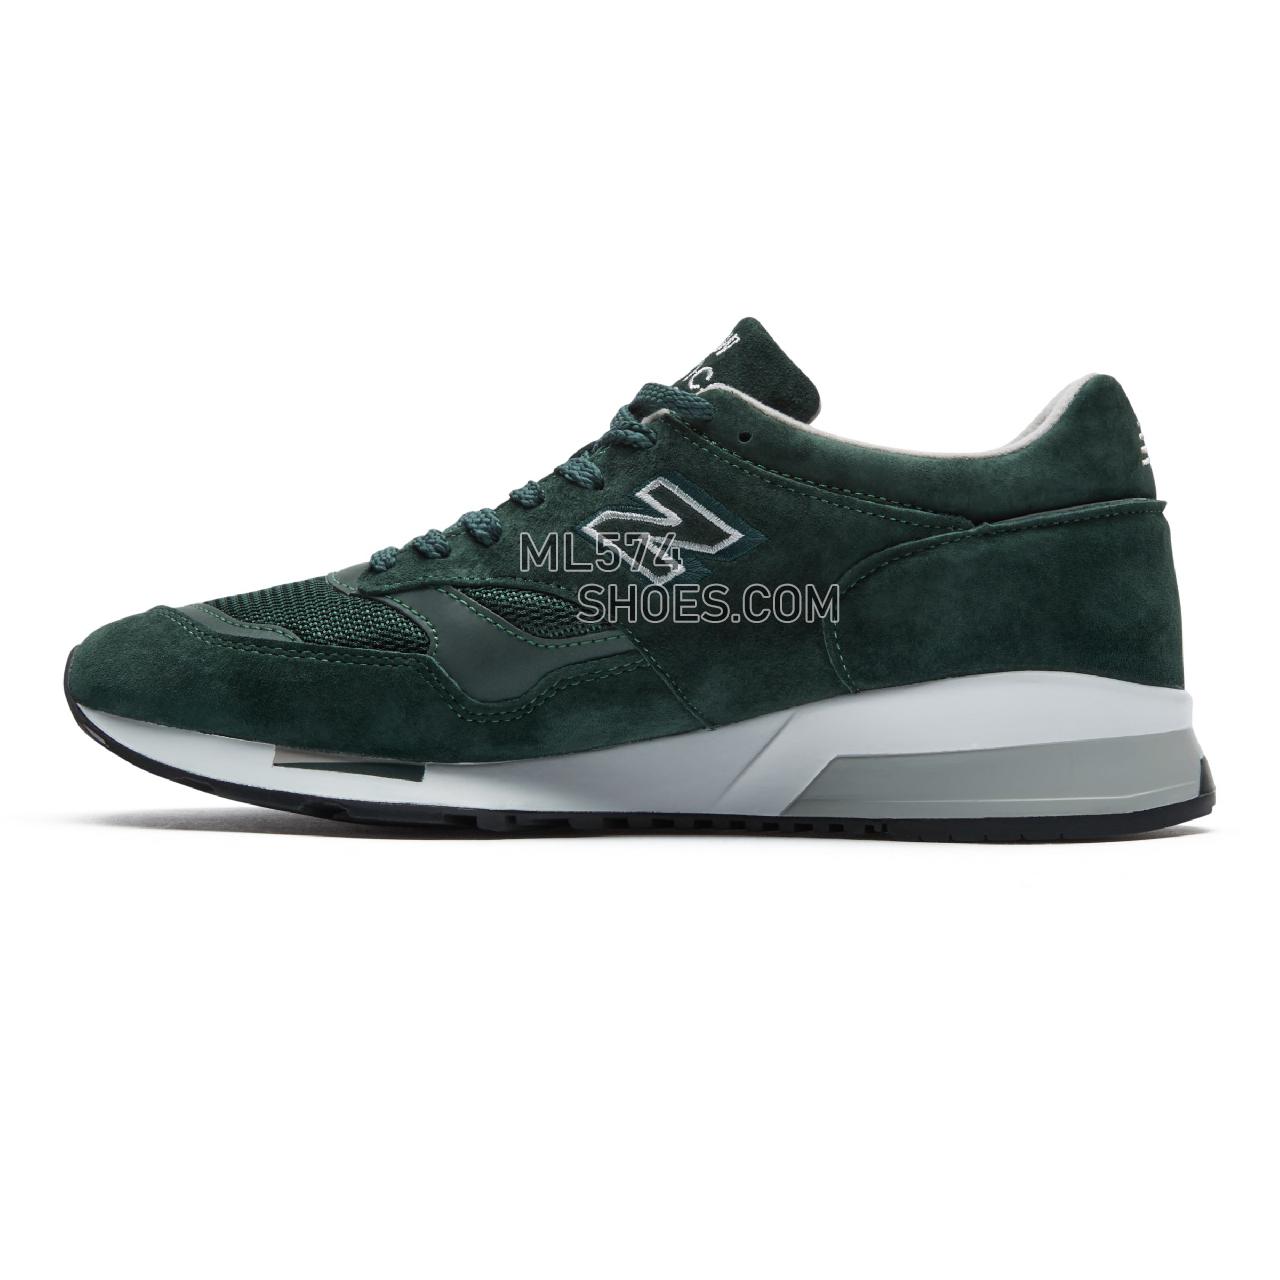 New Balance Made in UK 1500 - Men's Made in UK 1500 Classic - Dark Green with White - M1500DGW